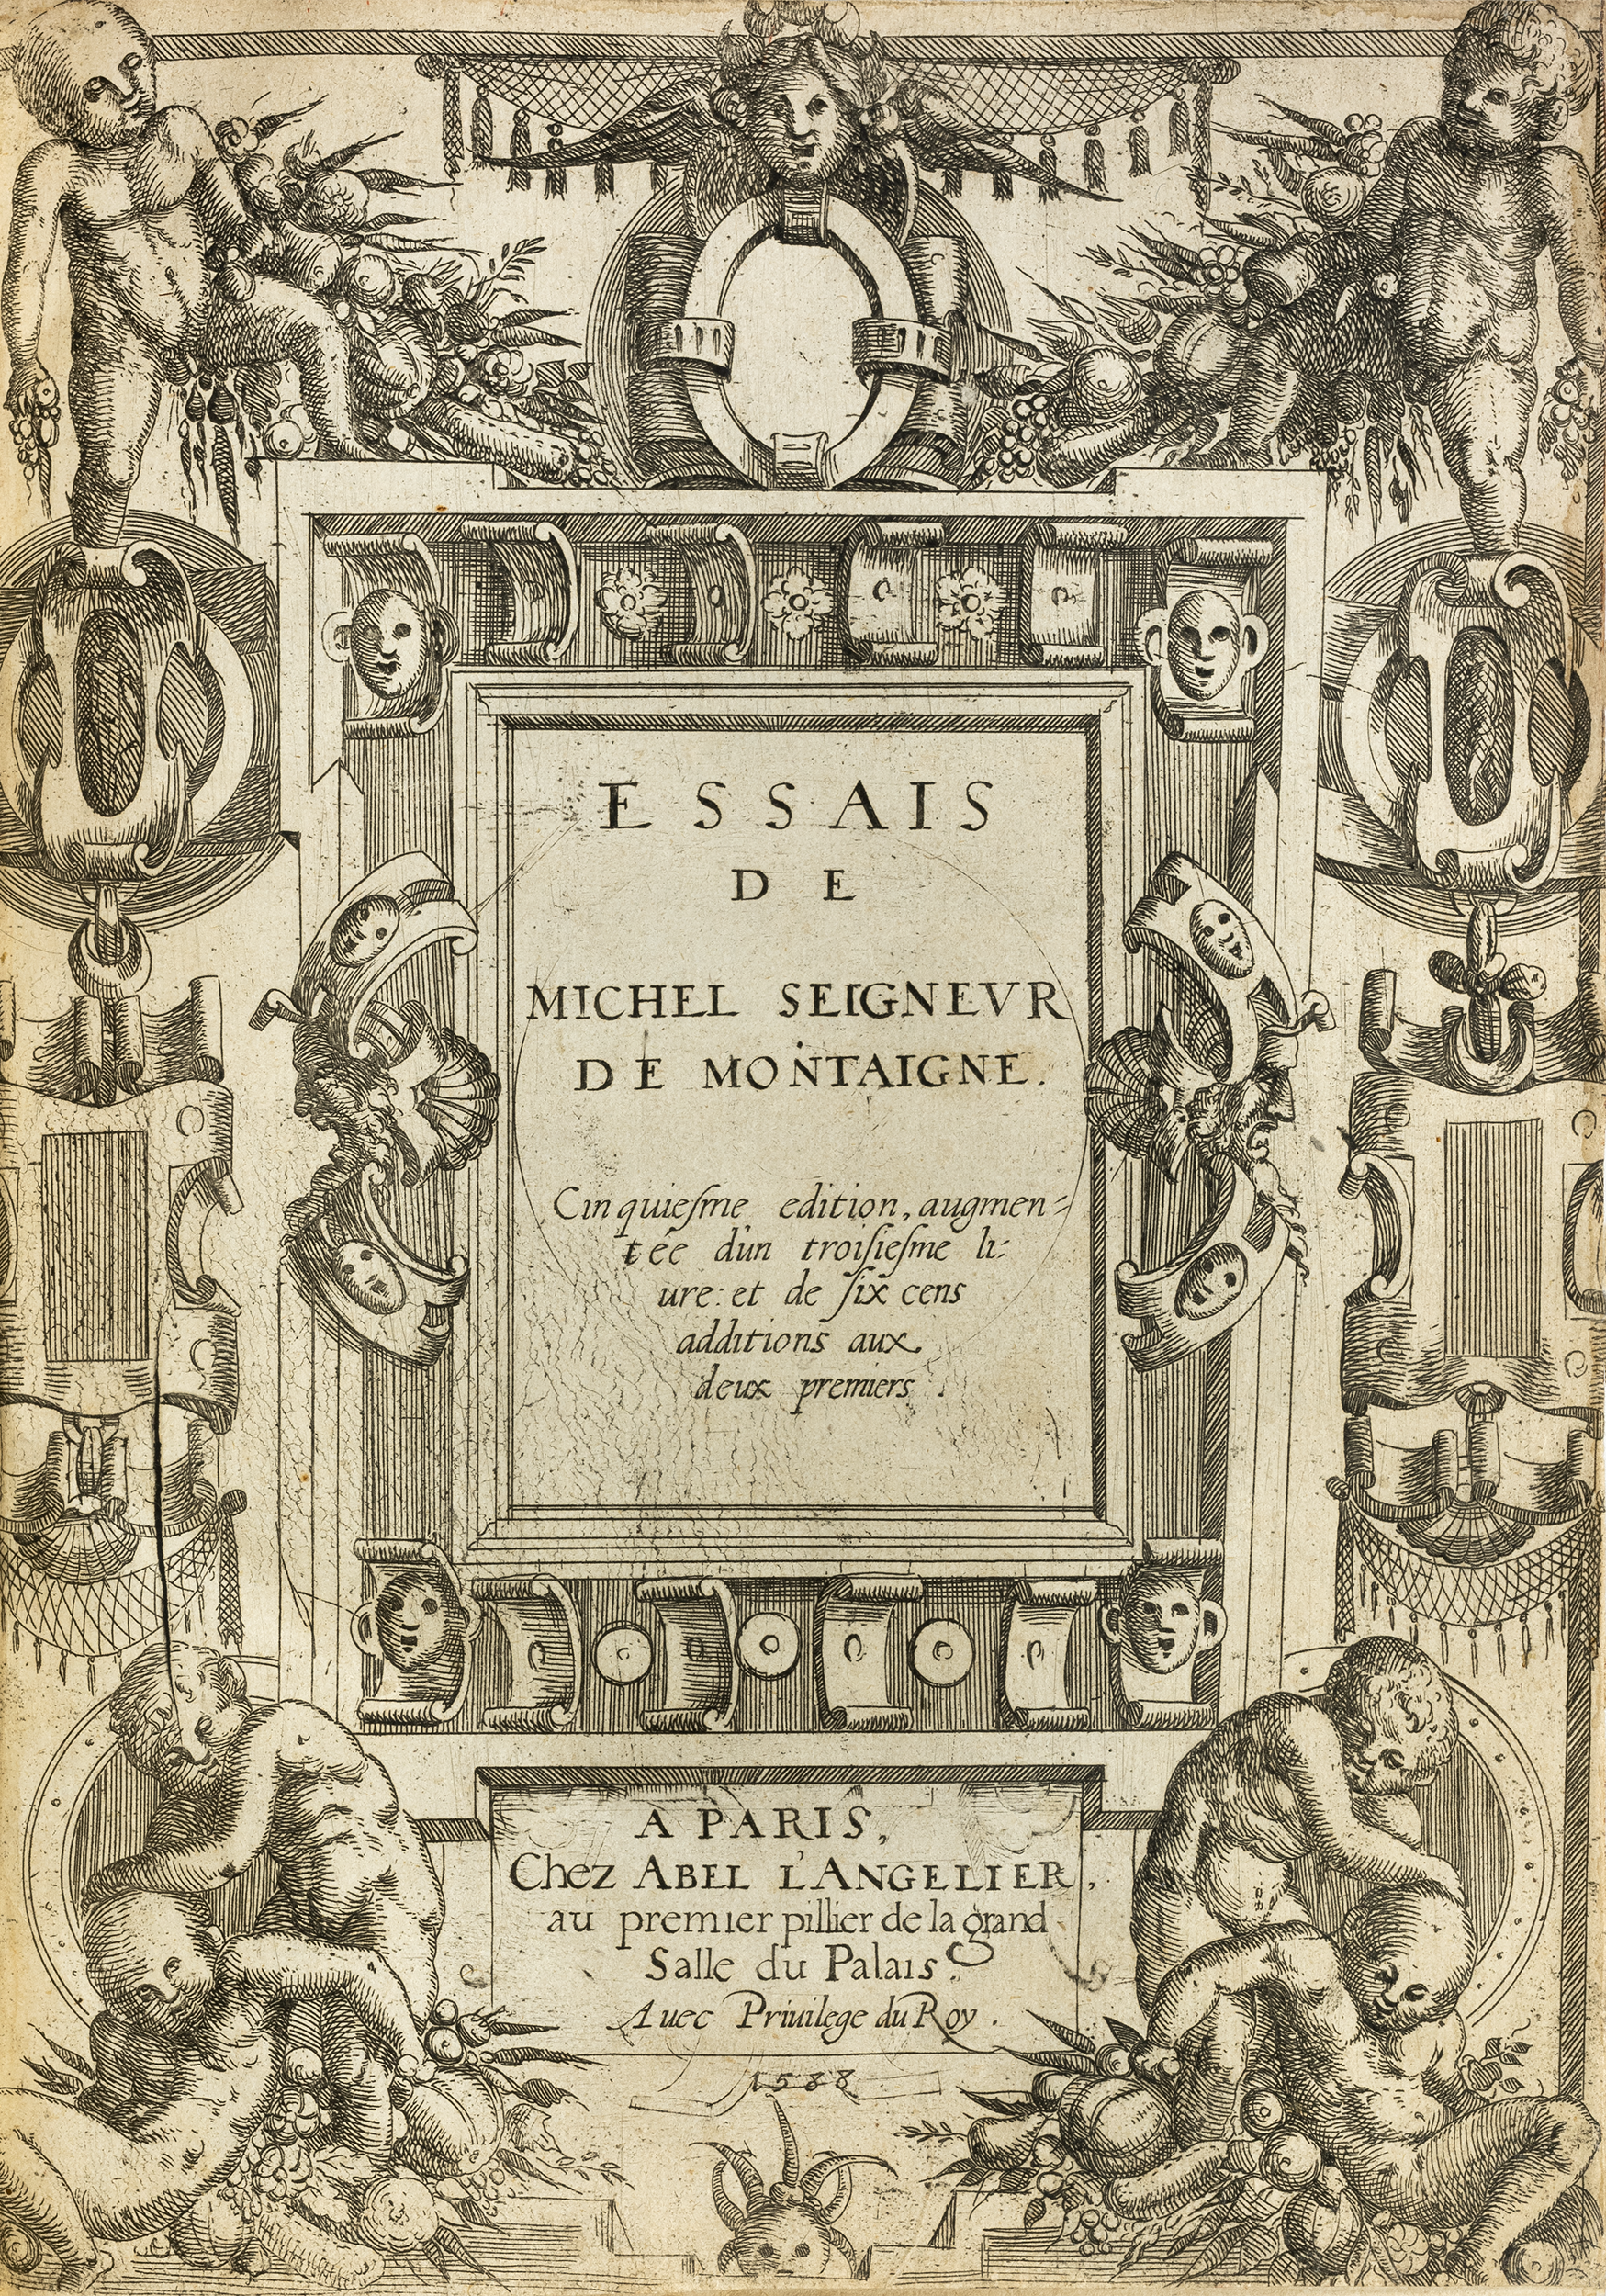 montaigne-essais-1588-first-complete-edition-title-page.png